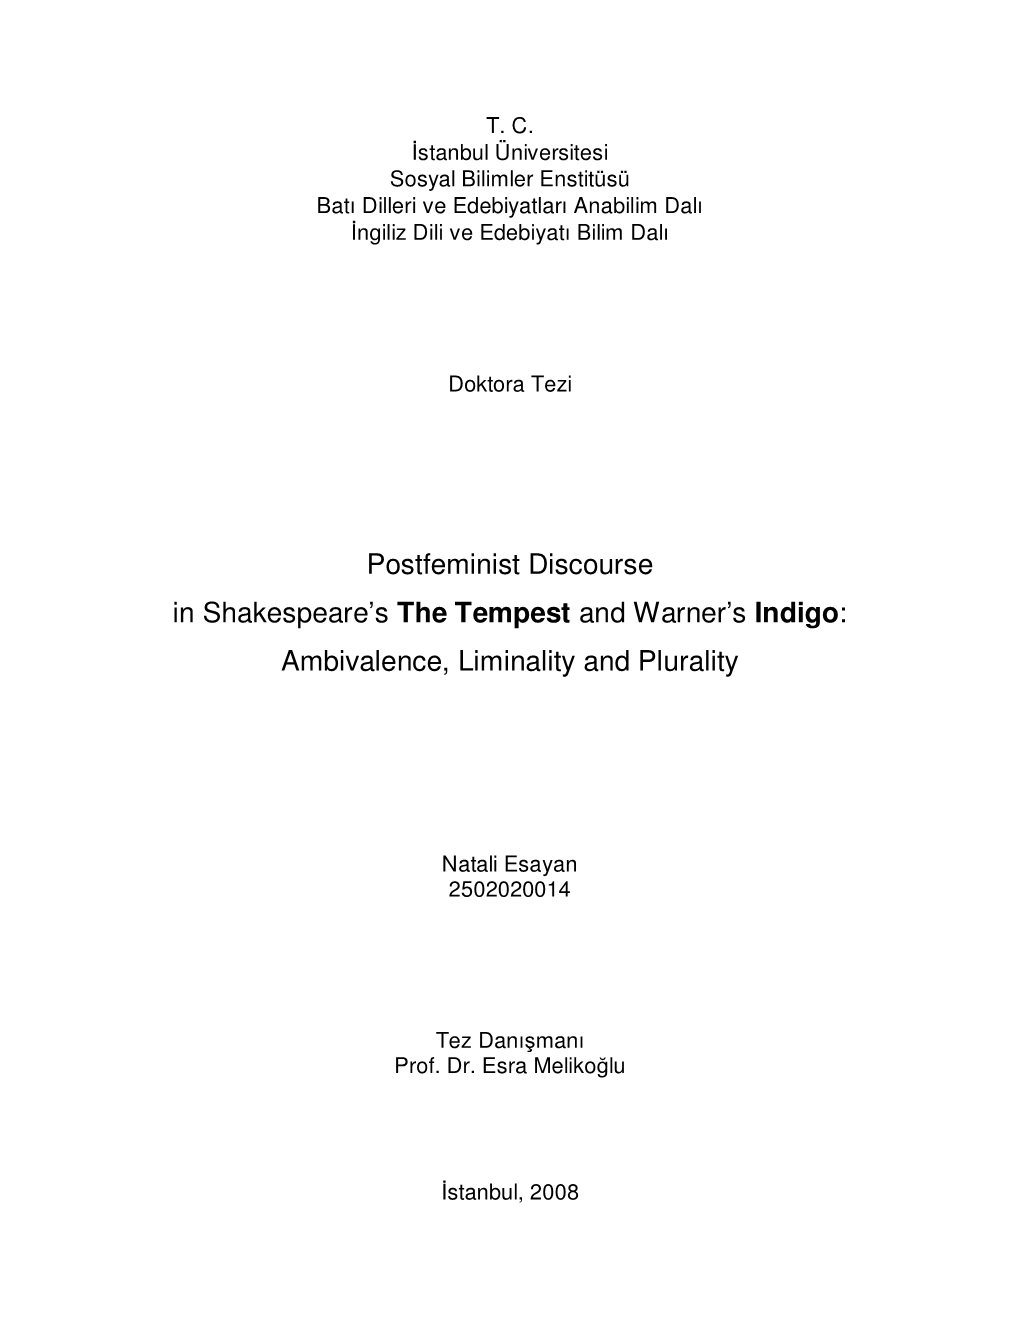 Postfeminist Discourse in Shakespeare's the Tempest and Warner's Indigo